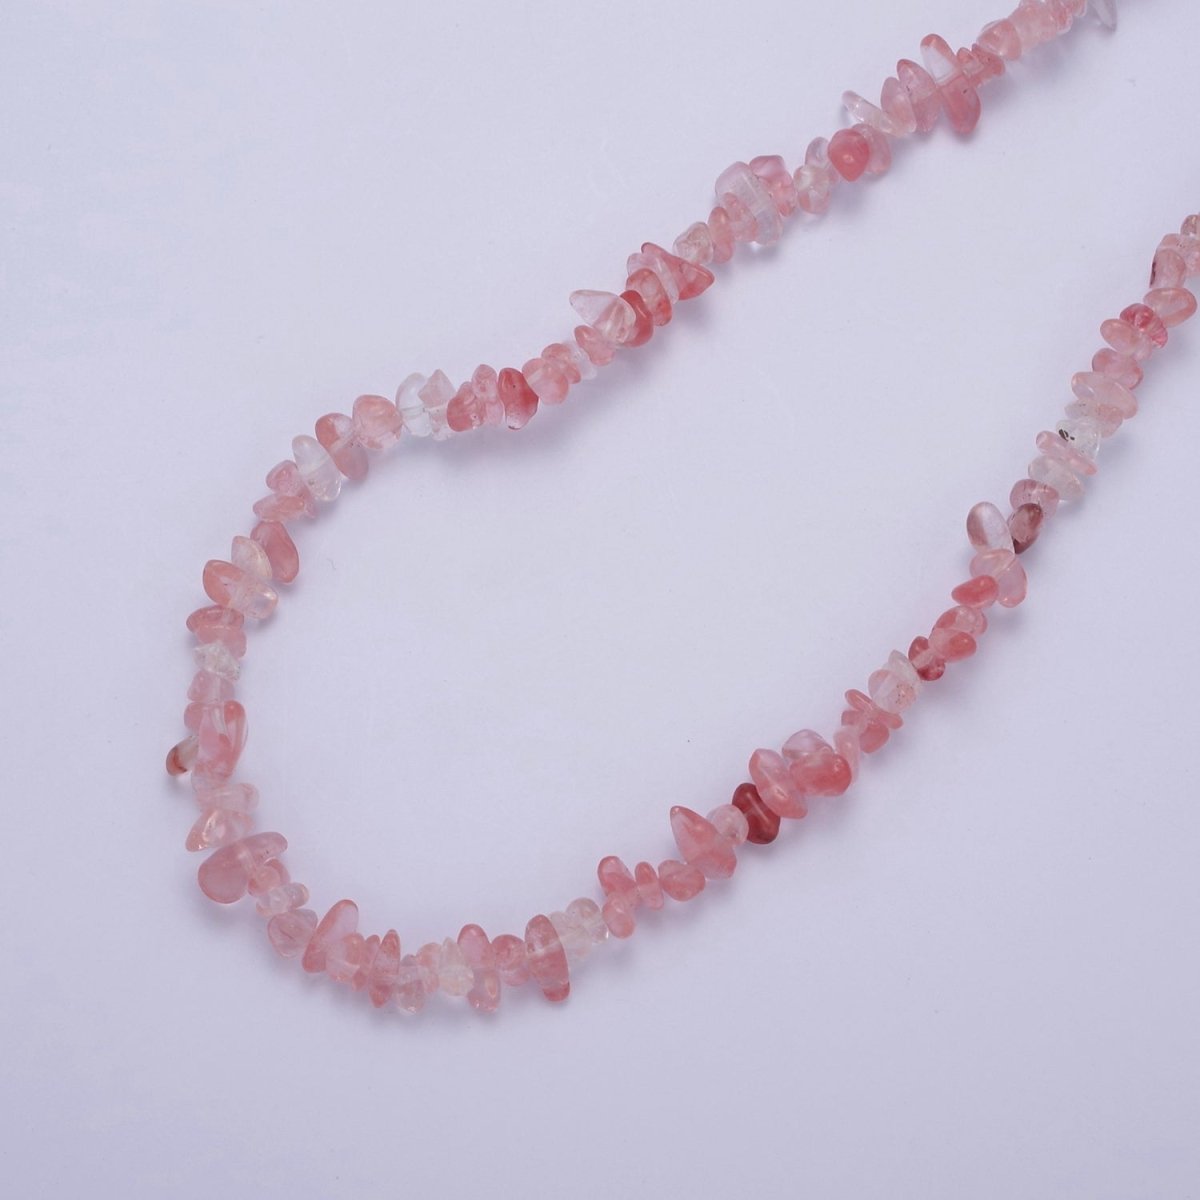 17.7 Inch Natural Watermelon Quartz Crystal Stone Bead Necklace with 2" Extender | WA-634 Clearance Pricing - DLUXCA